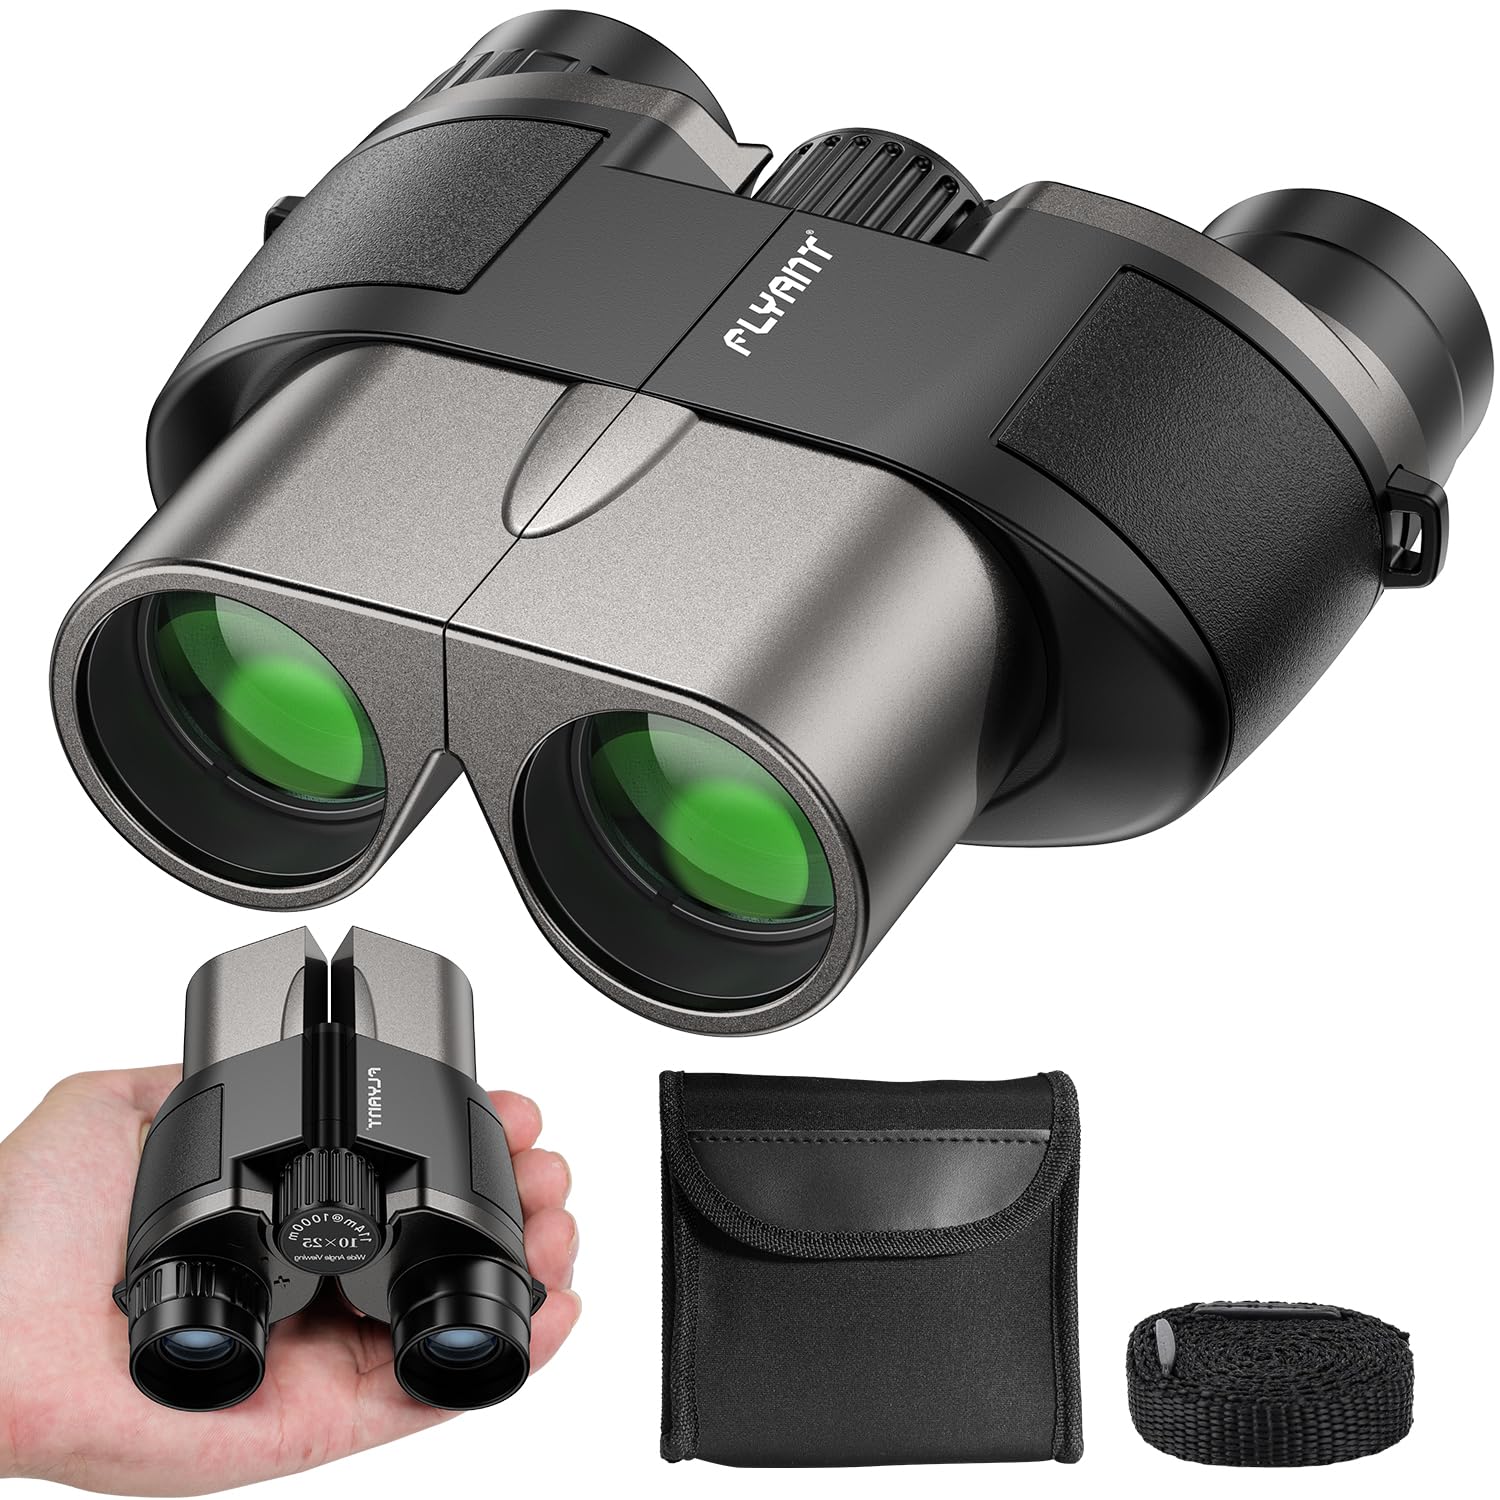 12X25 High Powered Binoculars for Adults, Compact Binoculars with Clear Low Light Vision, Easy Focus Waterproof Small Binoculars for Bird Watching, Hunting, Hiking, Cruise Ship, Travel, Concerts